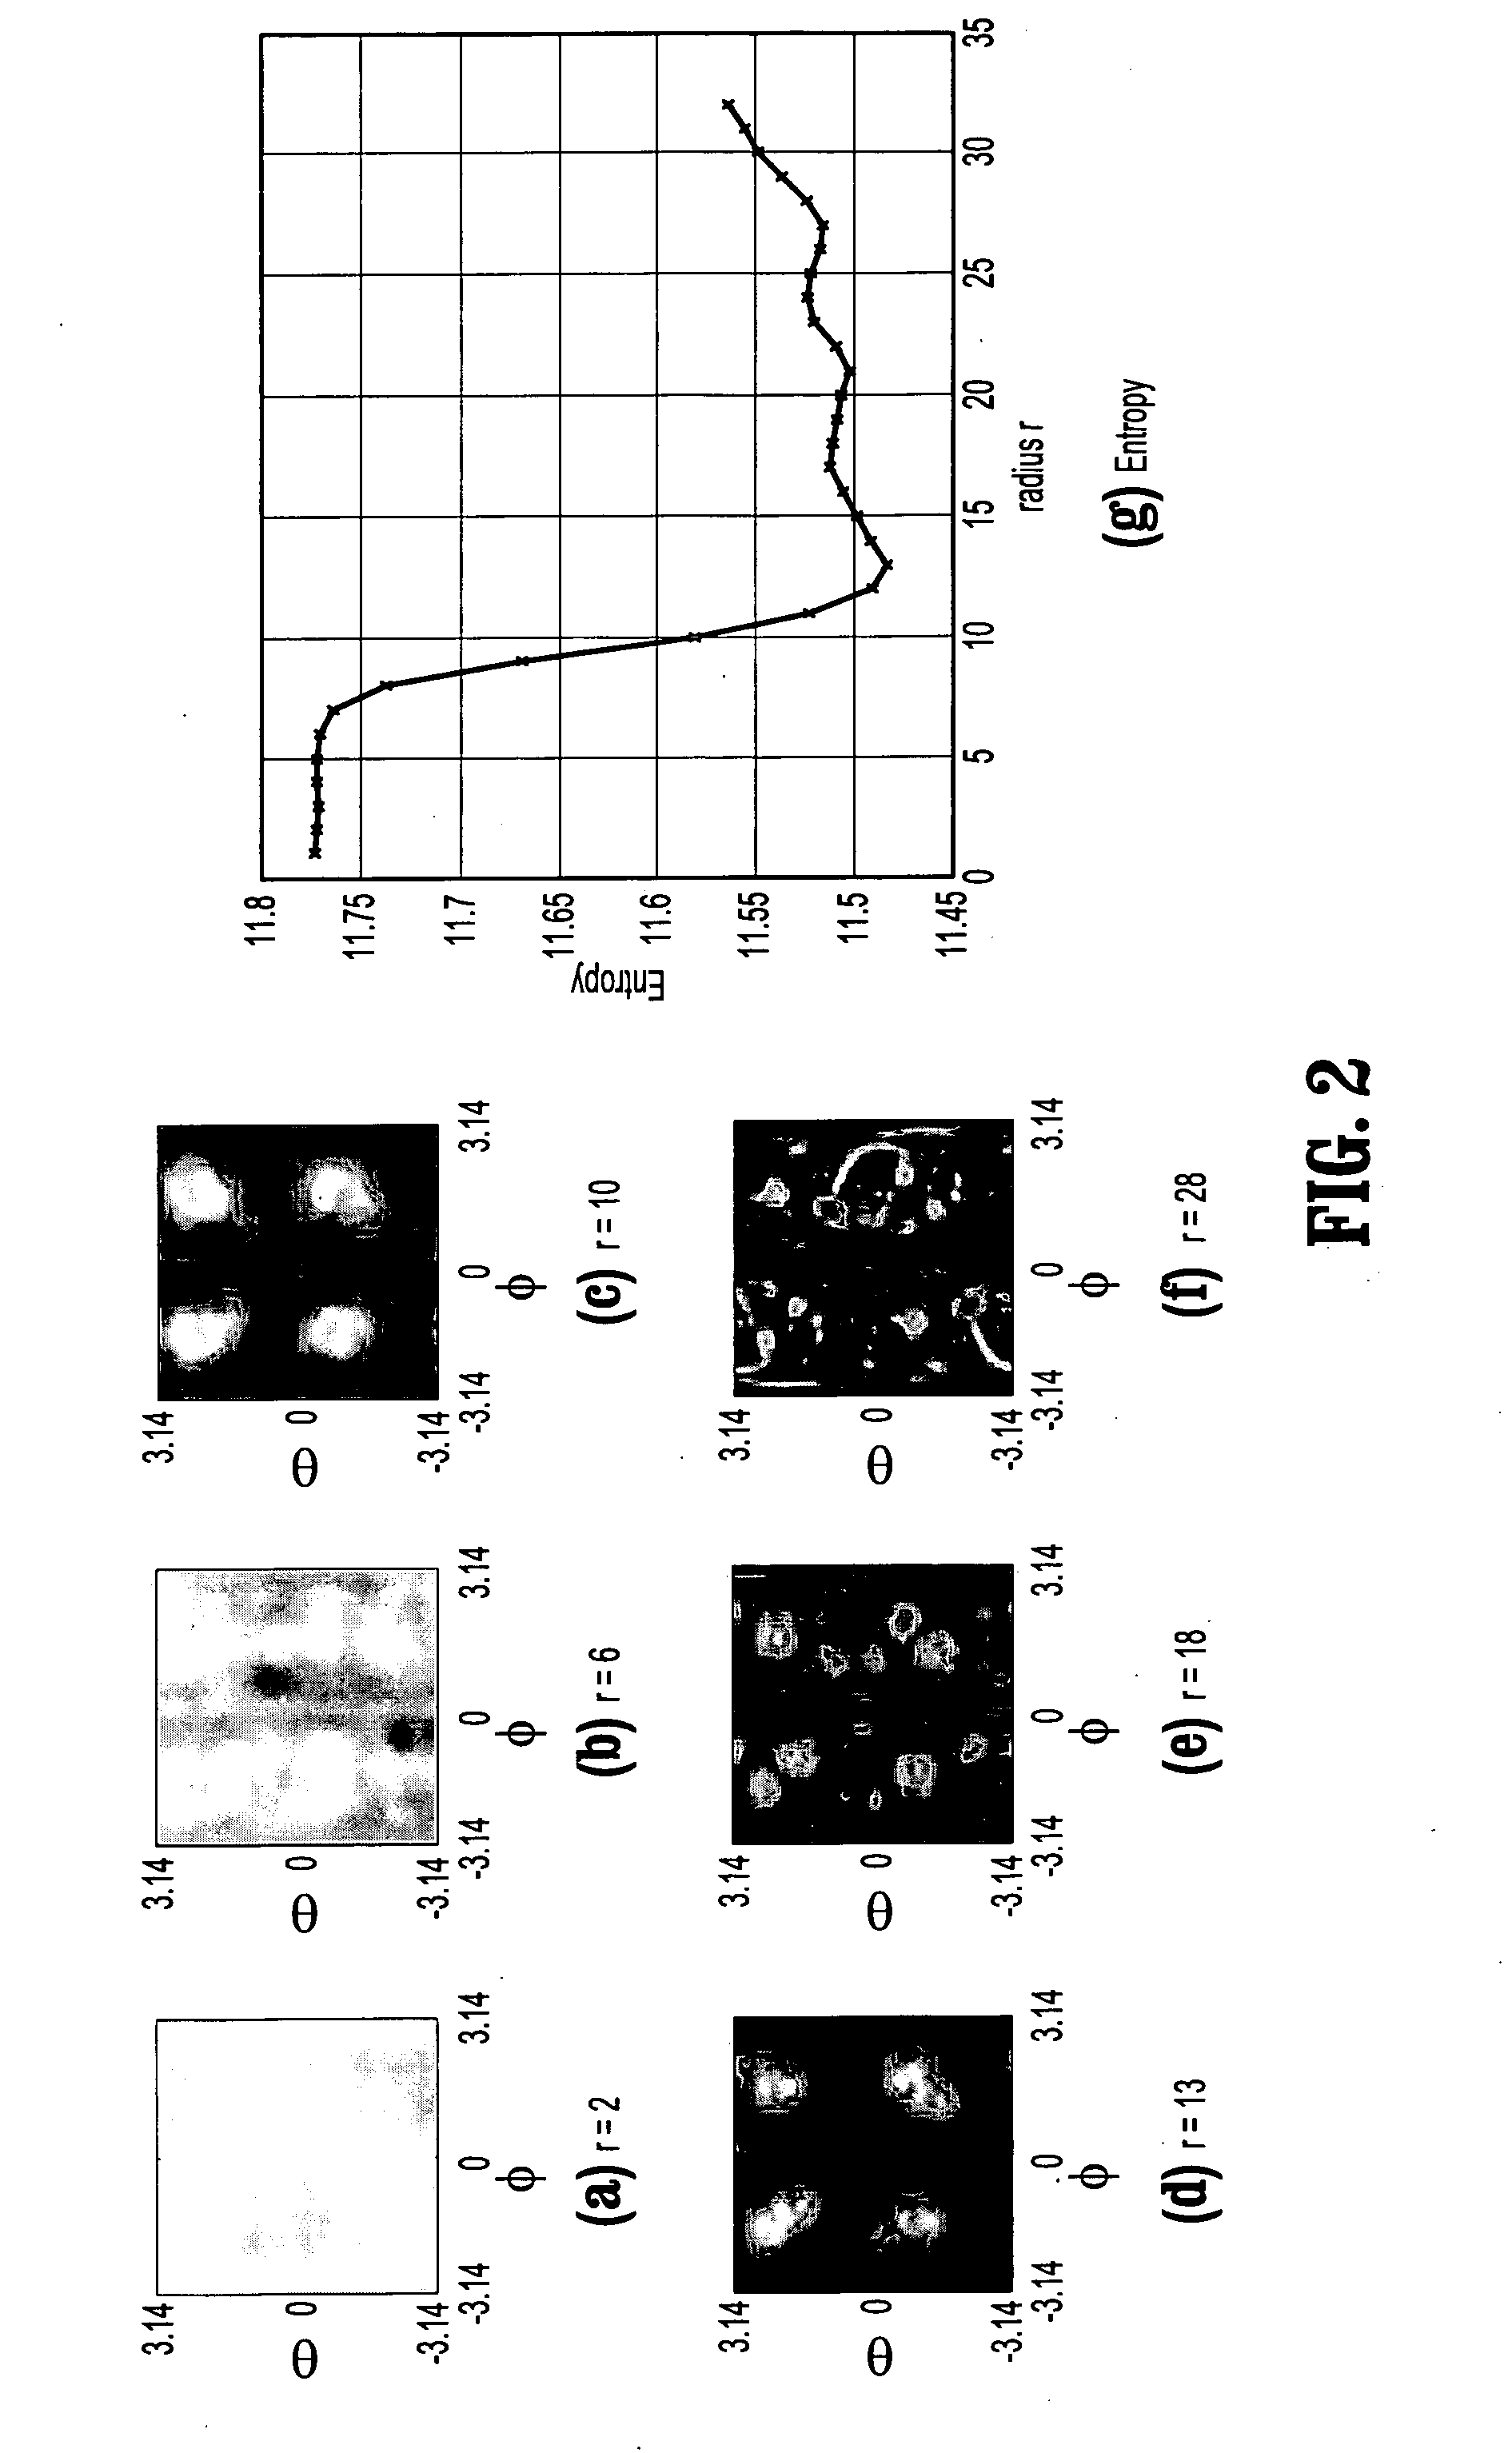 System and method for local pulmonary structure classification for computer-aided nodule detection